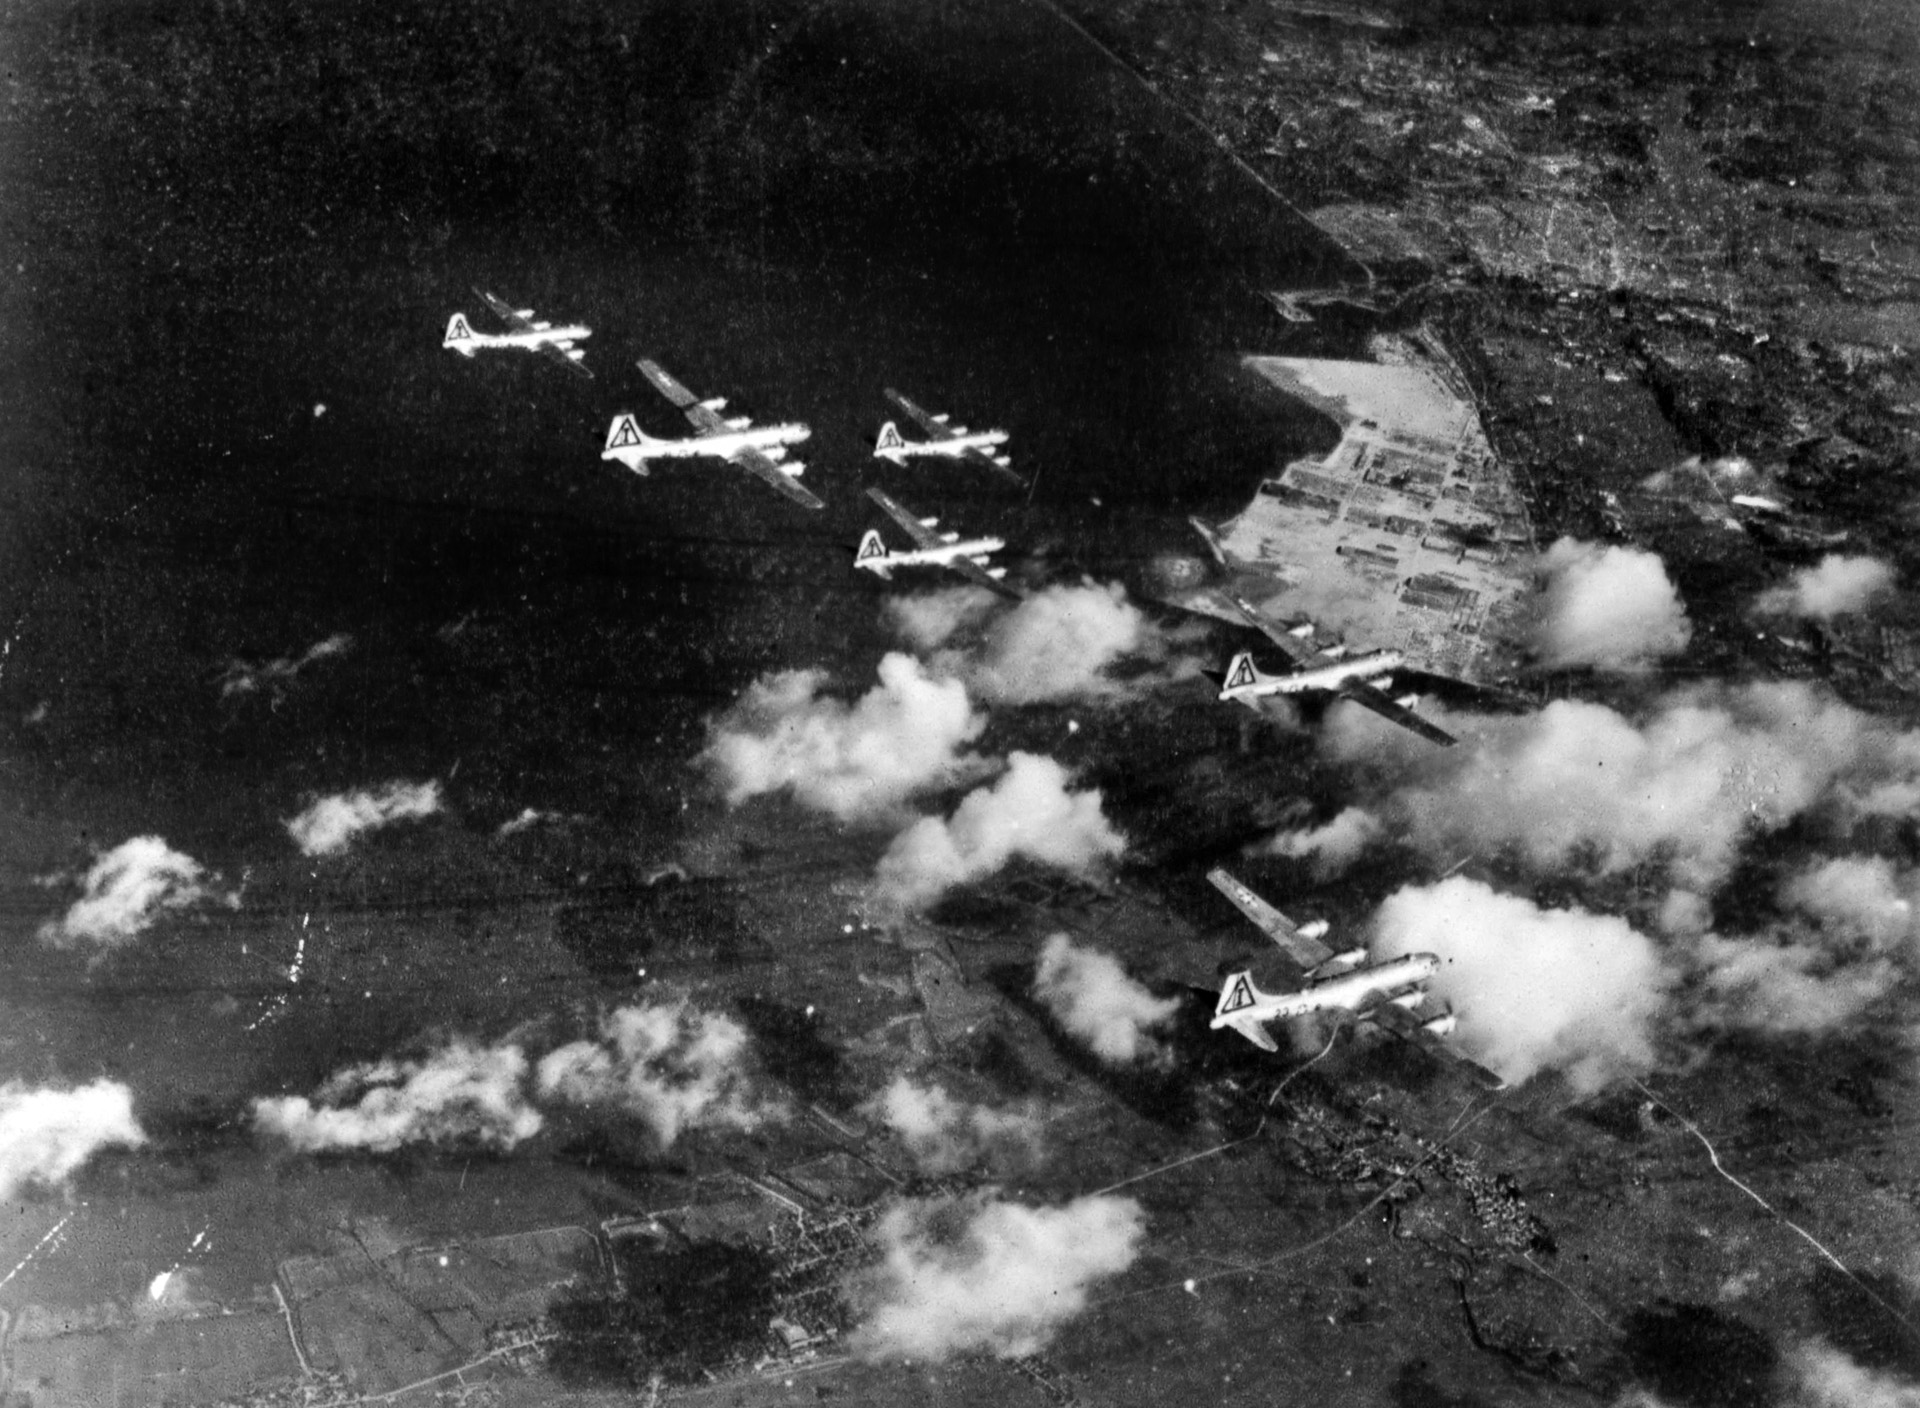 A formation of B-29s on their way to hit a Japanese factory complex. Tokyo was hit by 350 B-29s on March 9-10, 1945.